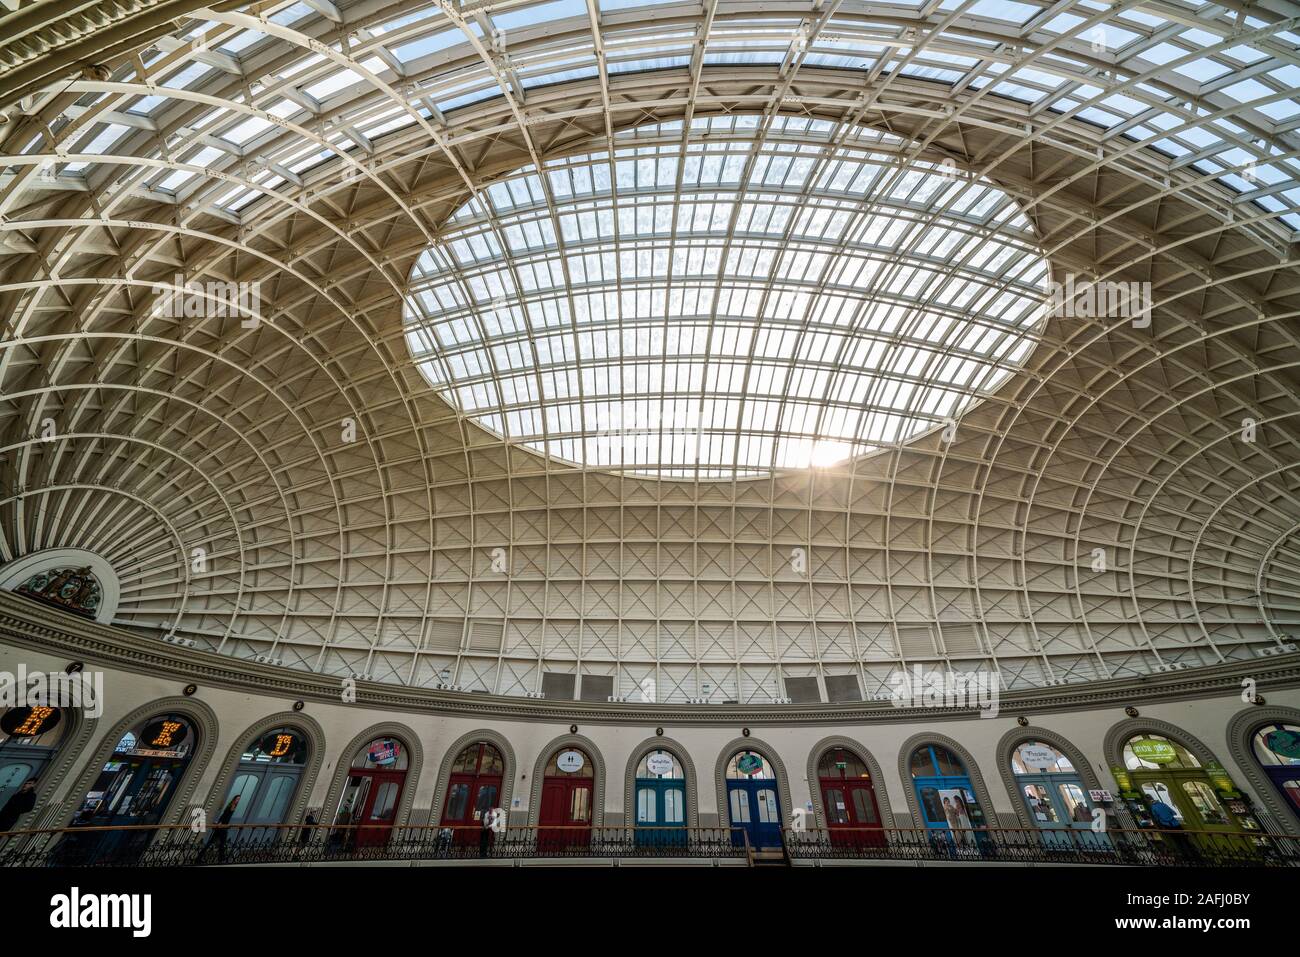 LEEDS, UNITED KINGDOM - AUGUST 13: This is the interior architecture of the Corn Exchange building, a boutique shopping center and popular travel dest Stock Photo